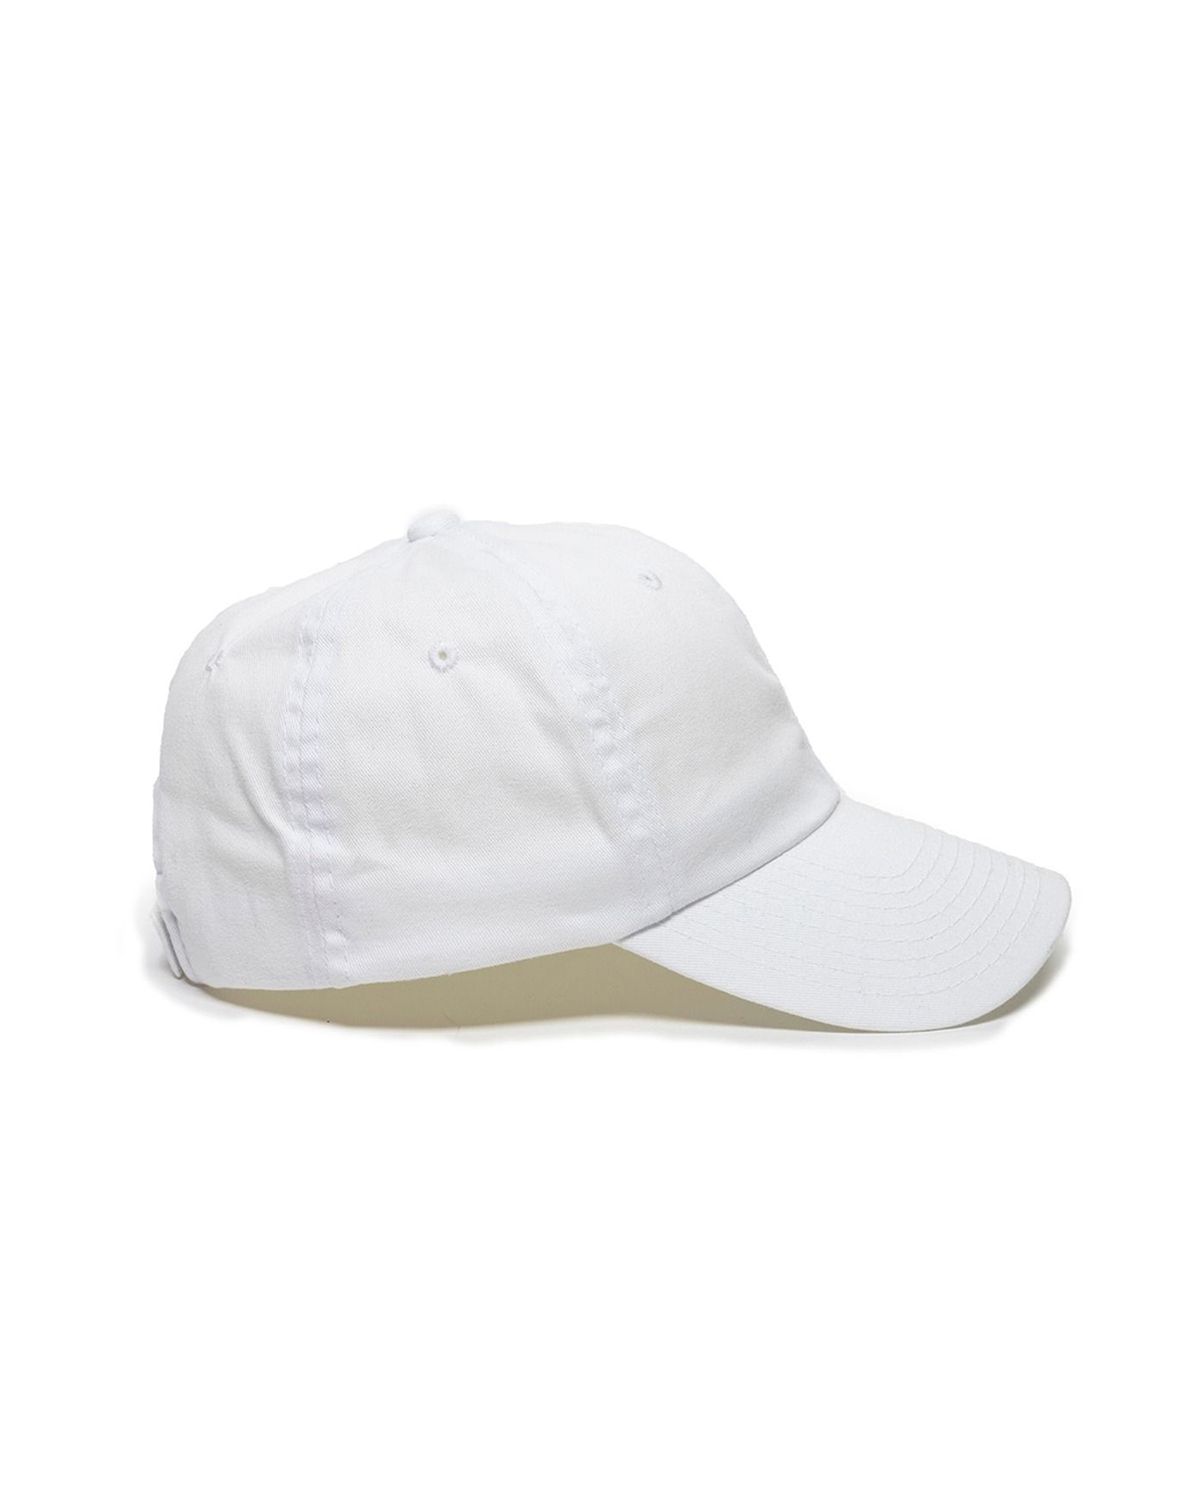 'Outdoor Cap BCT-662 Brushed Twill Solid Back Cap'